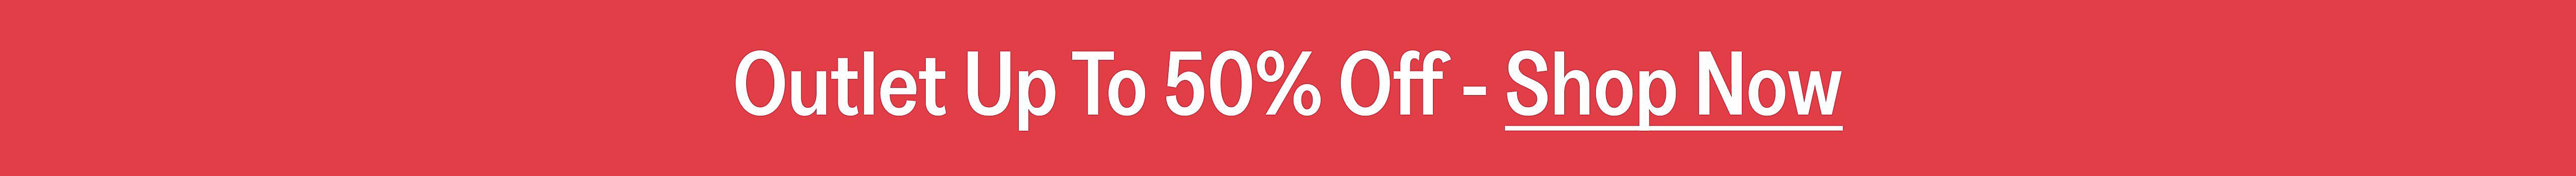 outlet promotion up to 50% off